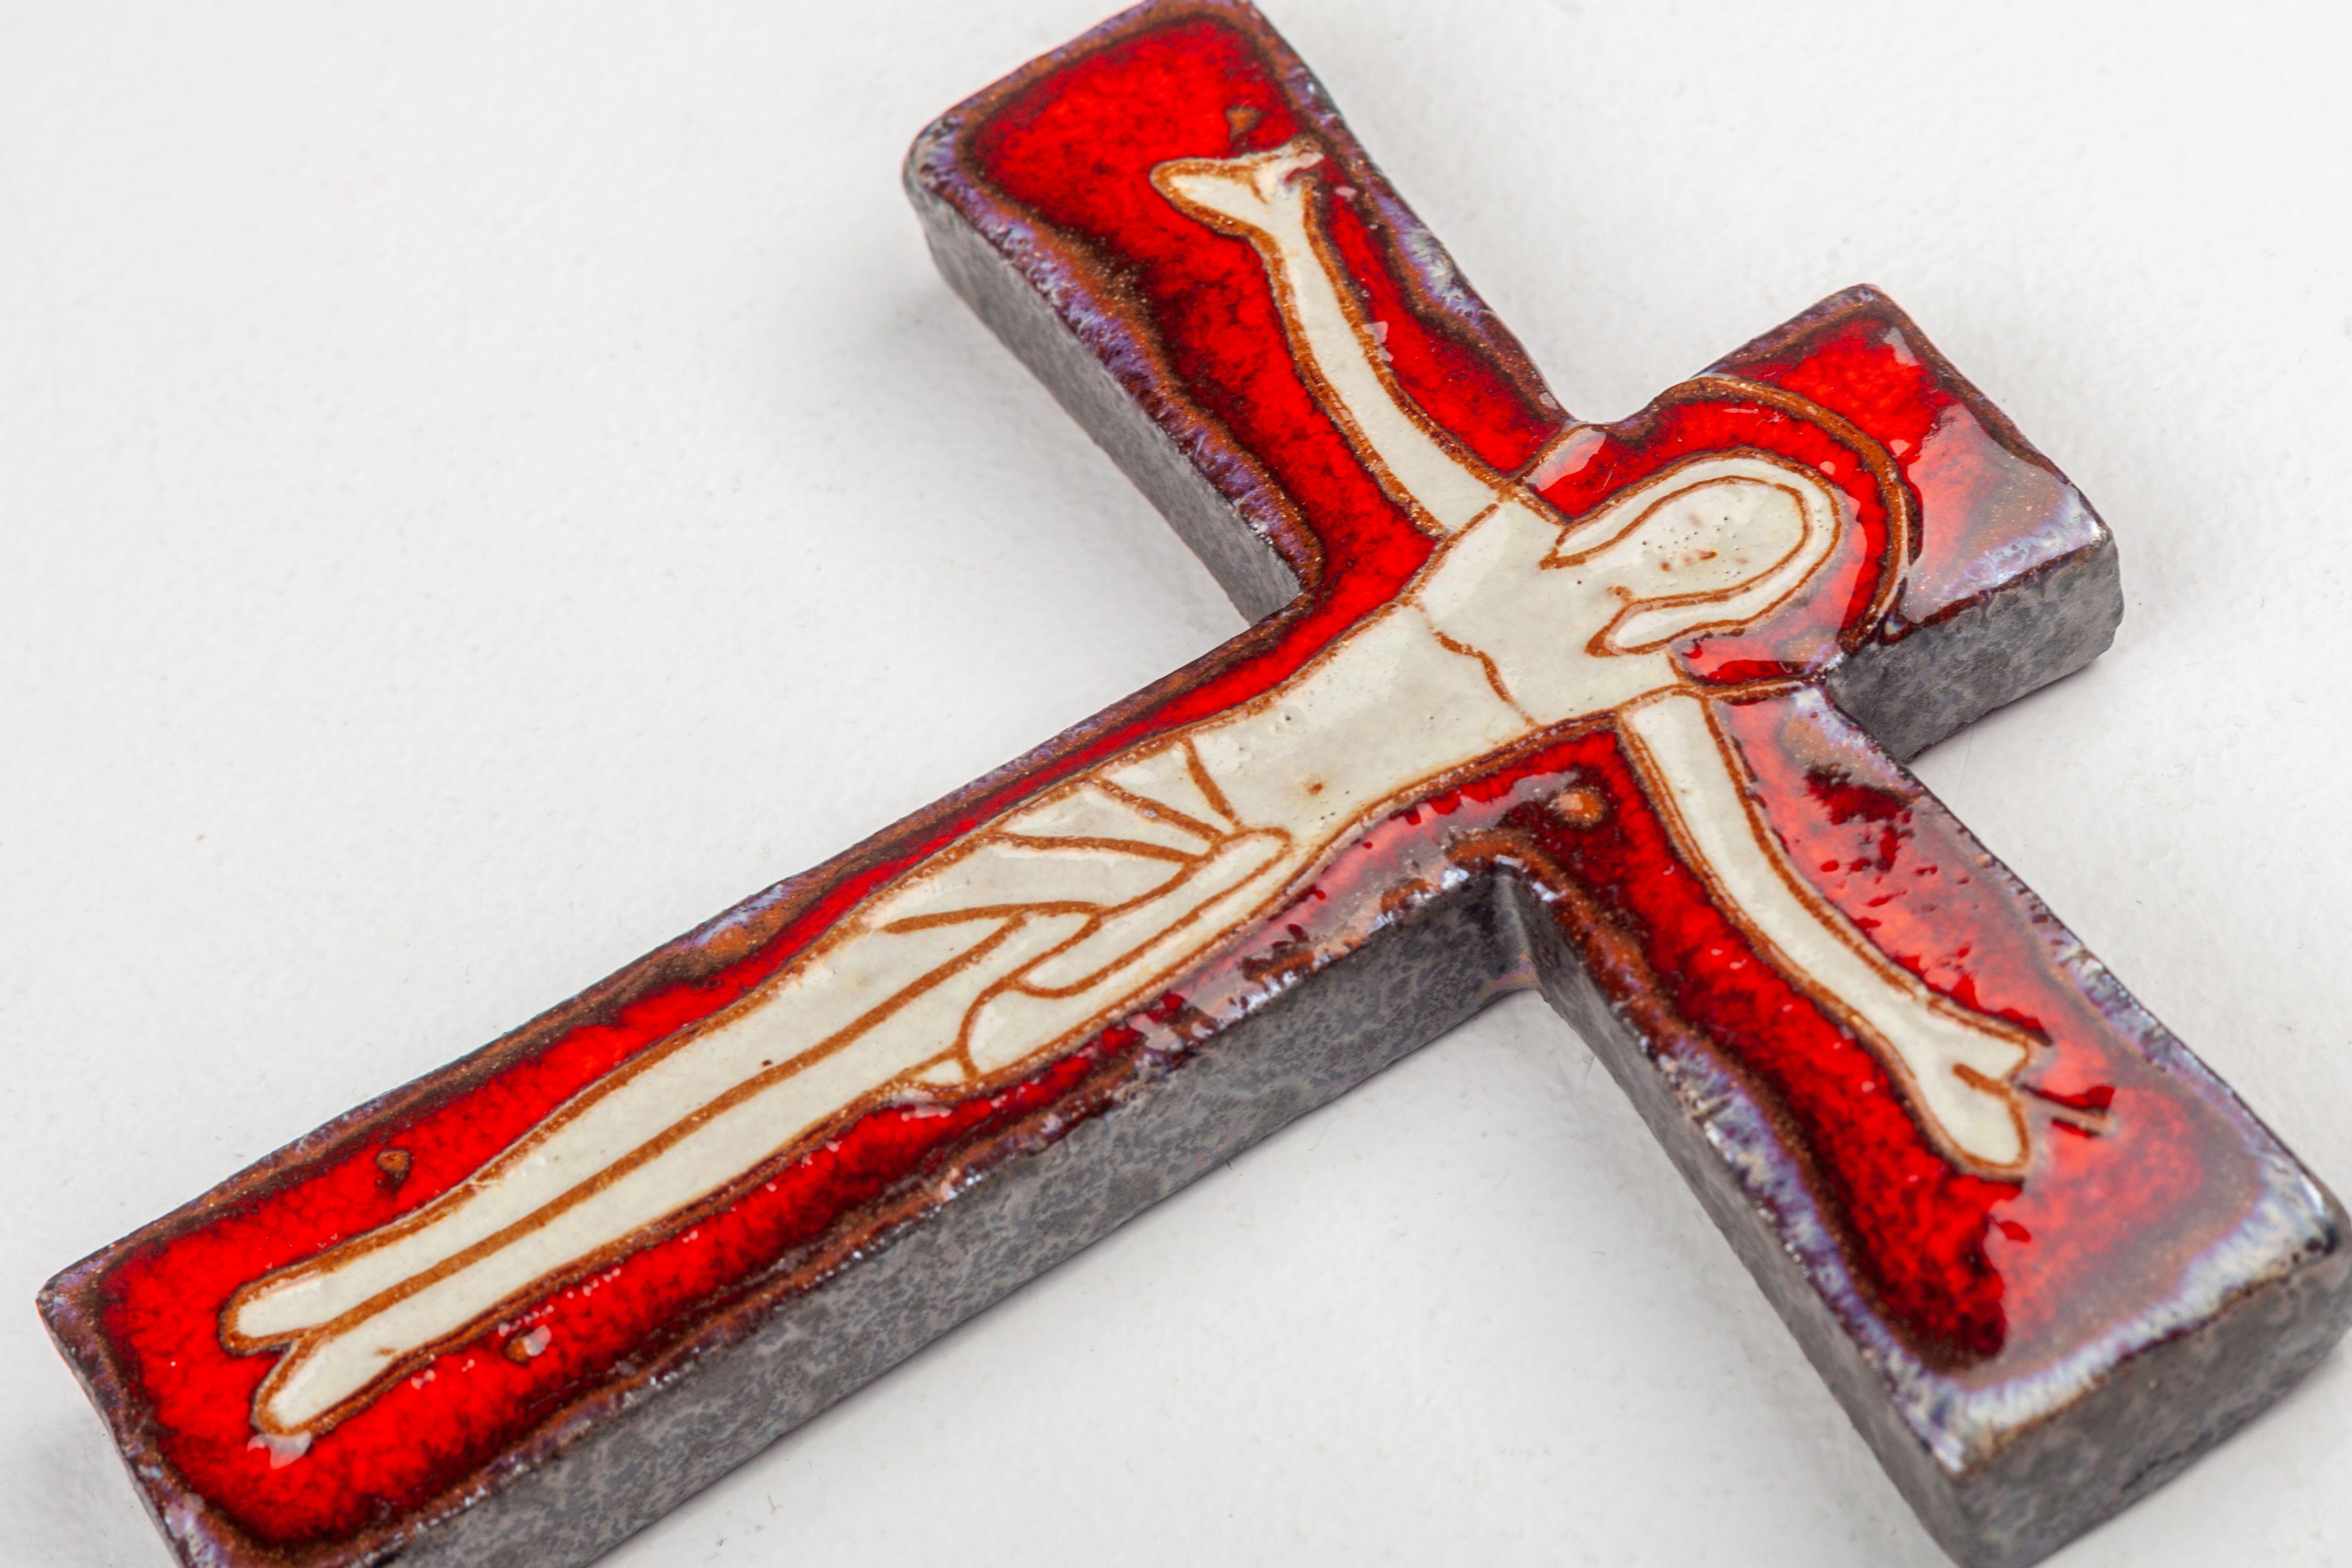 This wall cross is compact in wingspan and proportions, possessing a substantial thickness. The Christ figure on the cross radiates a glowy glossy red hue across most of the cross's surface, while the sides of the cross exhibit a glossy granite-like